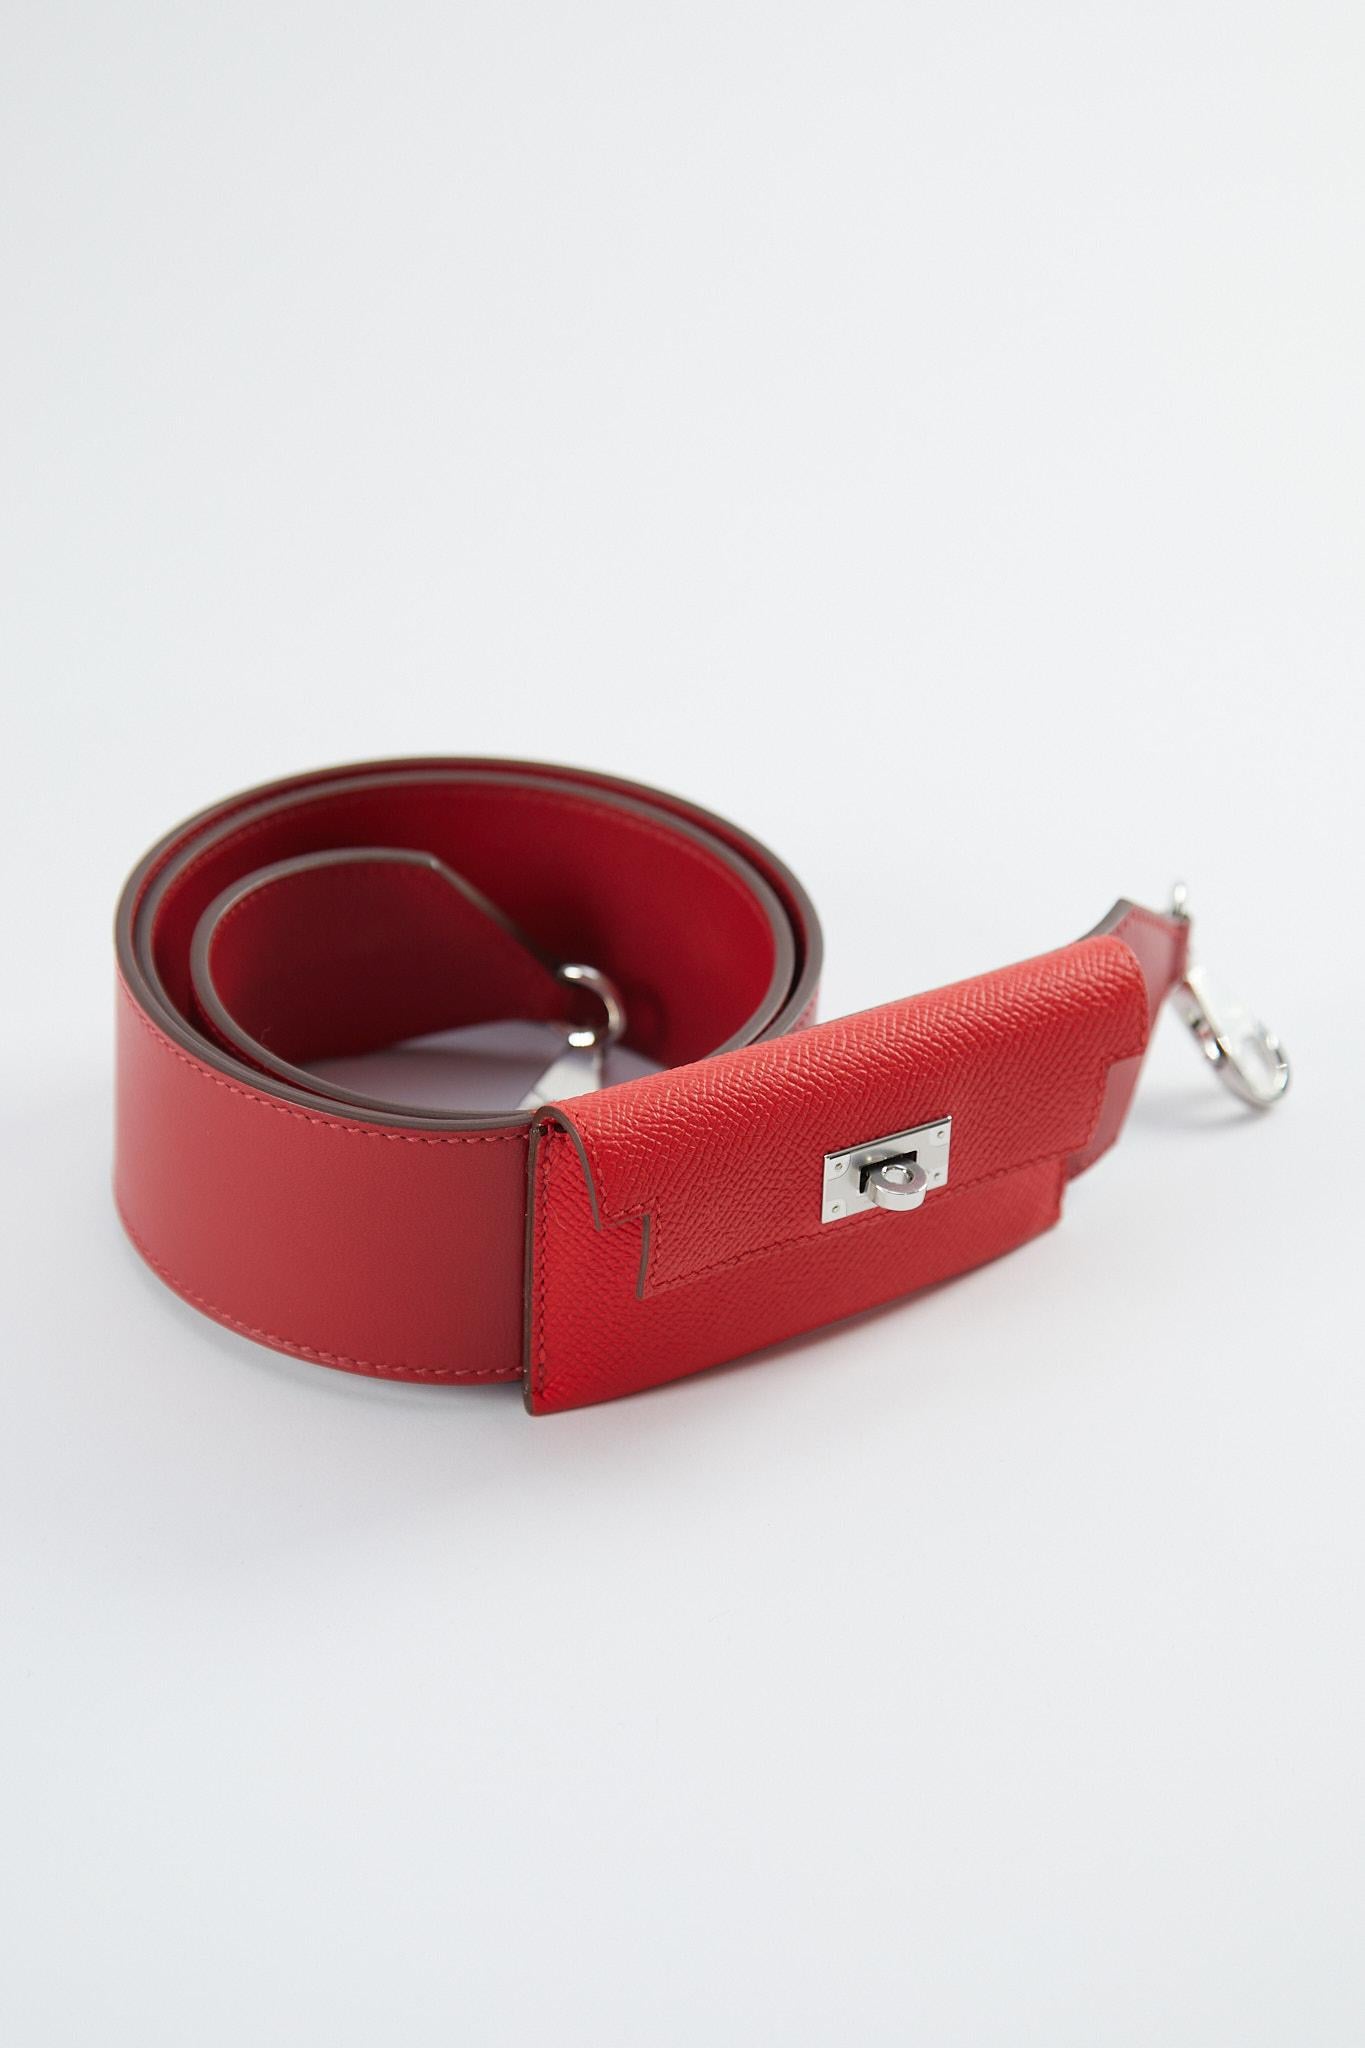 Hermès Kelly Pocket Strap 105cm in Rouge Casaque & Tomate

Epsom and Swift Leather With Palladium Hardware

Y Stamp / No Receipt 

The 105cm is the longest length strap and enables most people to wear the bag crossbody, as well as on the